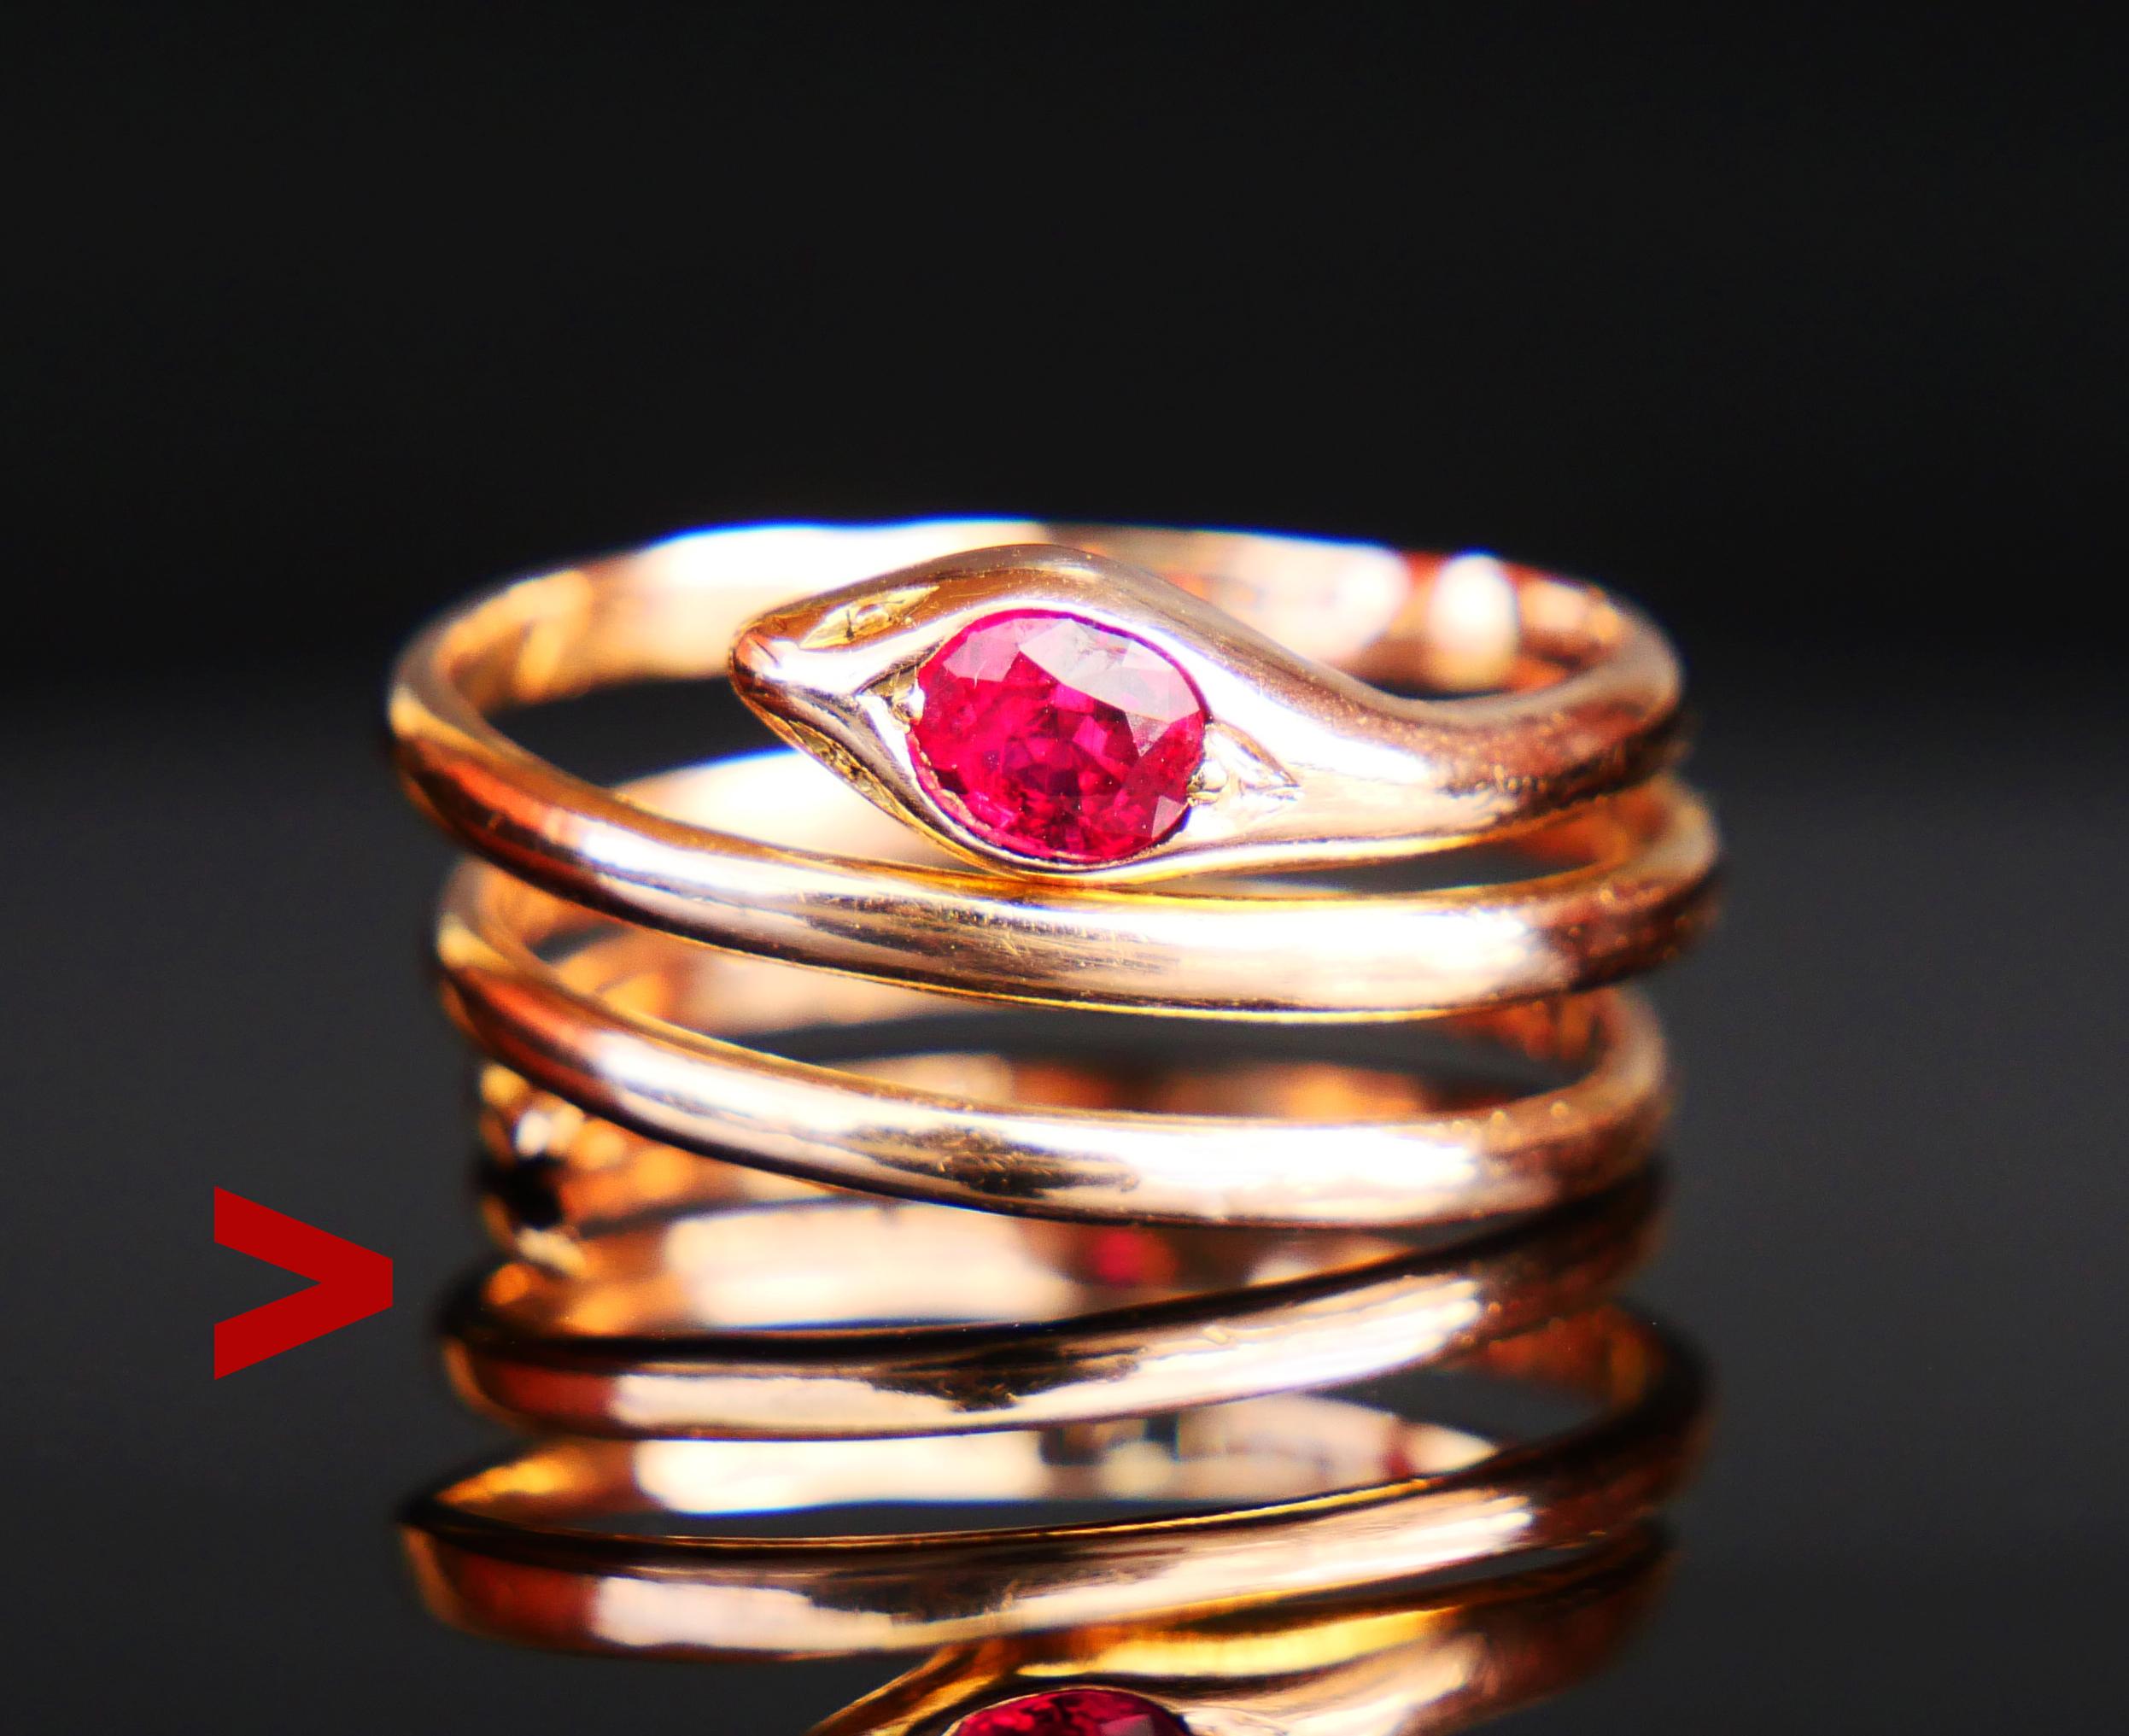 Antique Serpent Ring in solid 18K Orange Gold. Coiled body, head decorated with natural Ruby stone of fine quality measuring 5 mm x 4 mm x 2.9 mm deep / ca. 0.5ct.

This design is unisex and will look great both on Men or Women if the size is